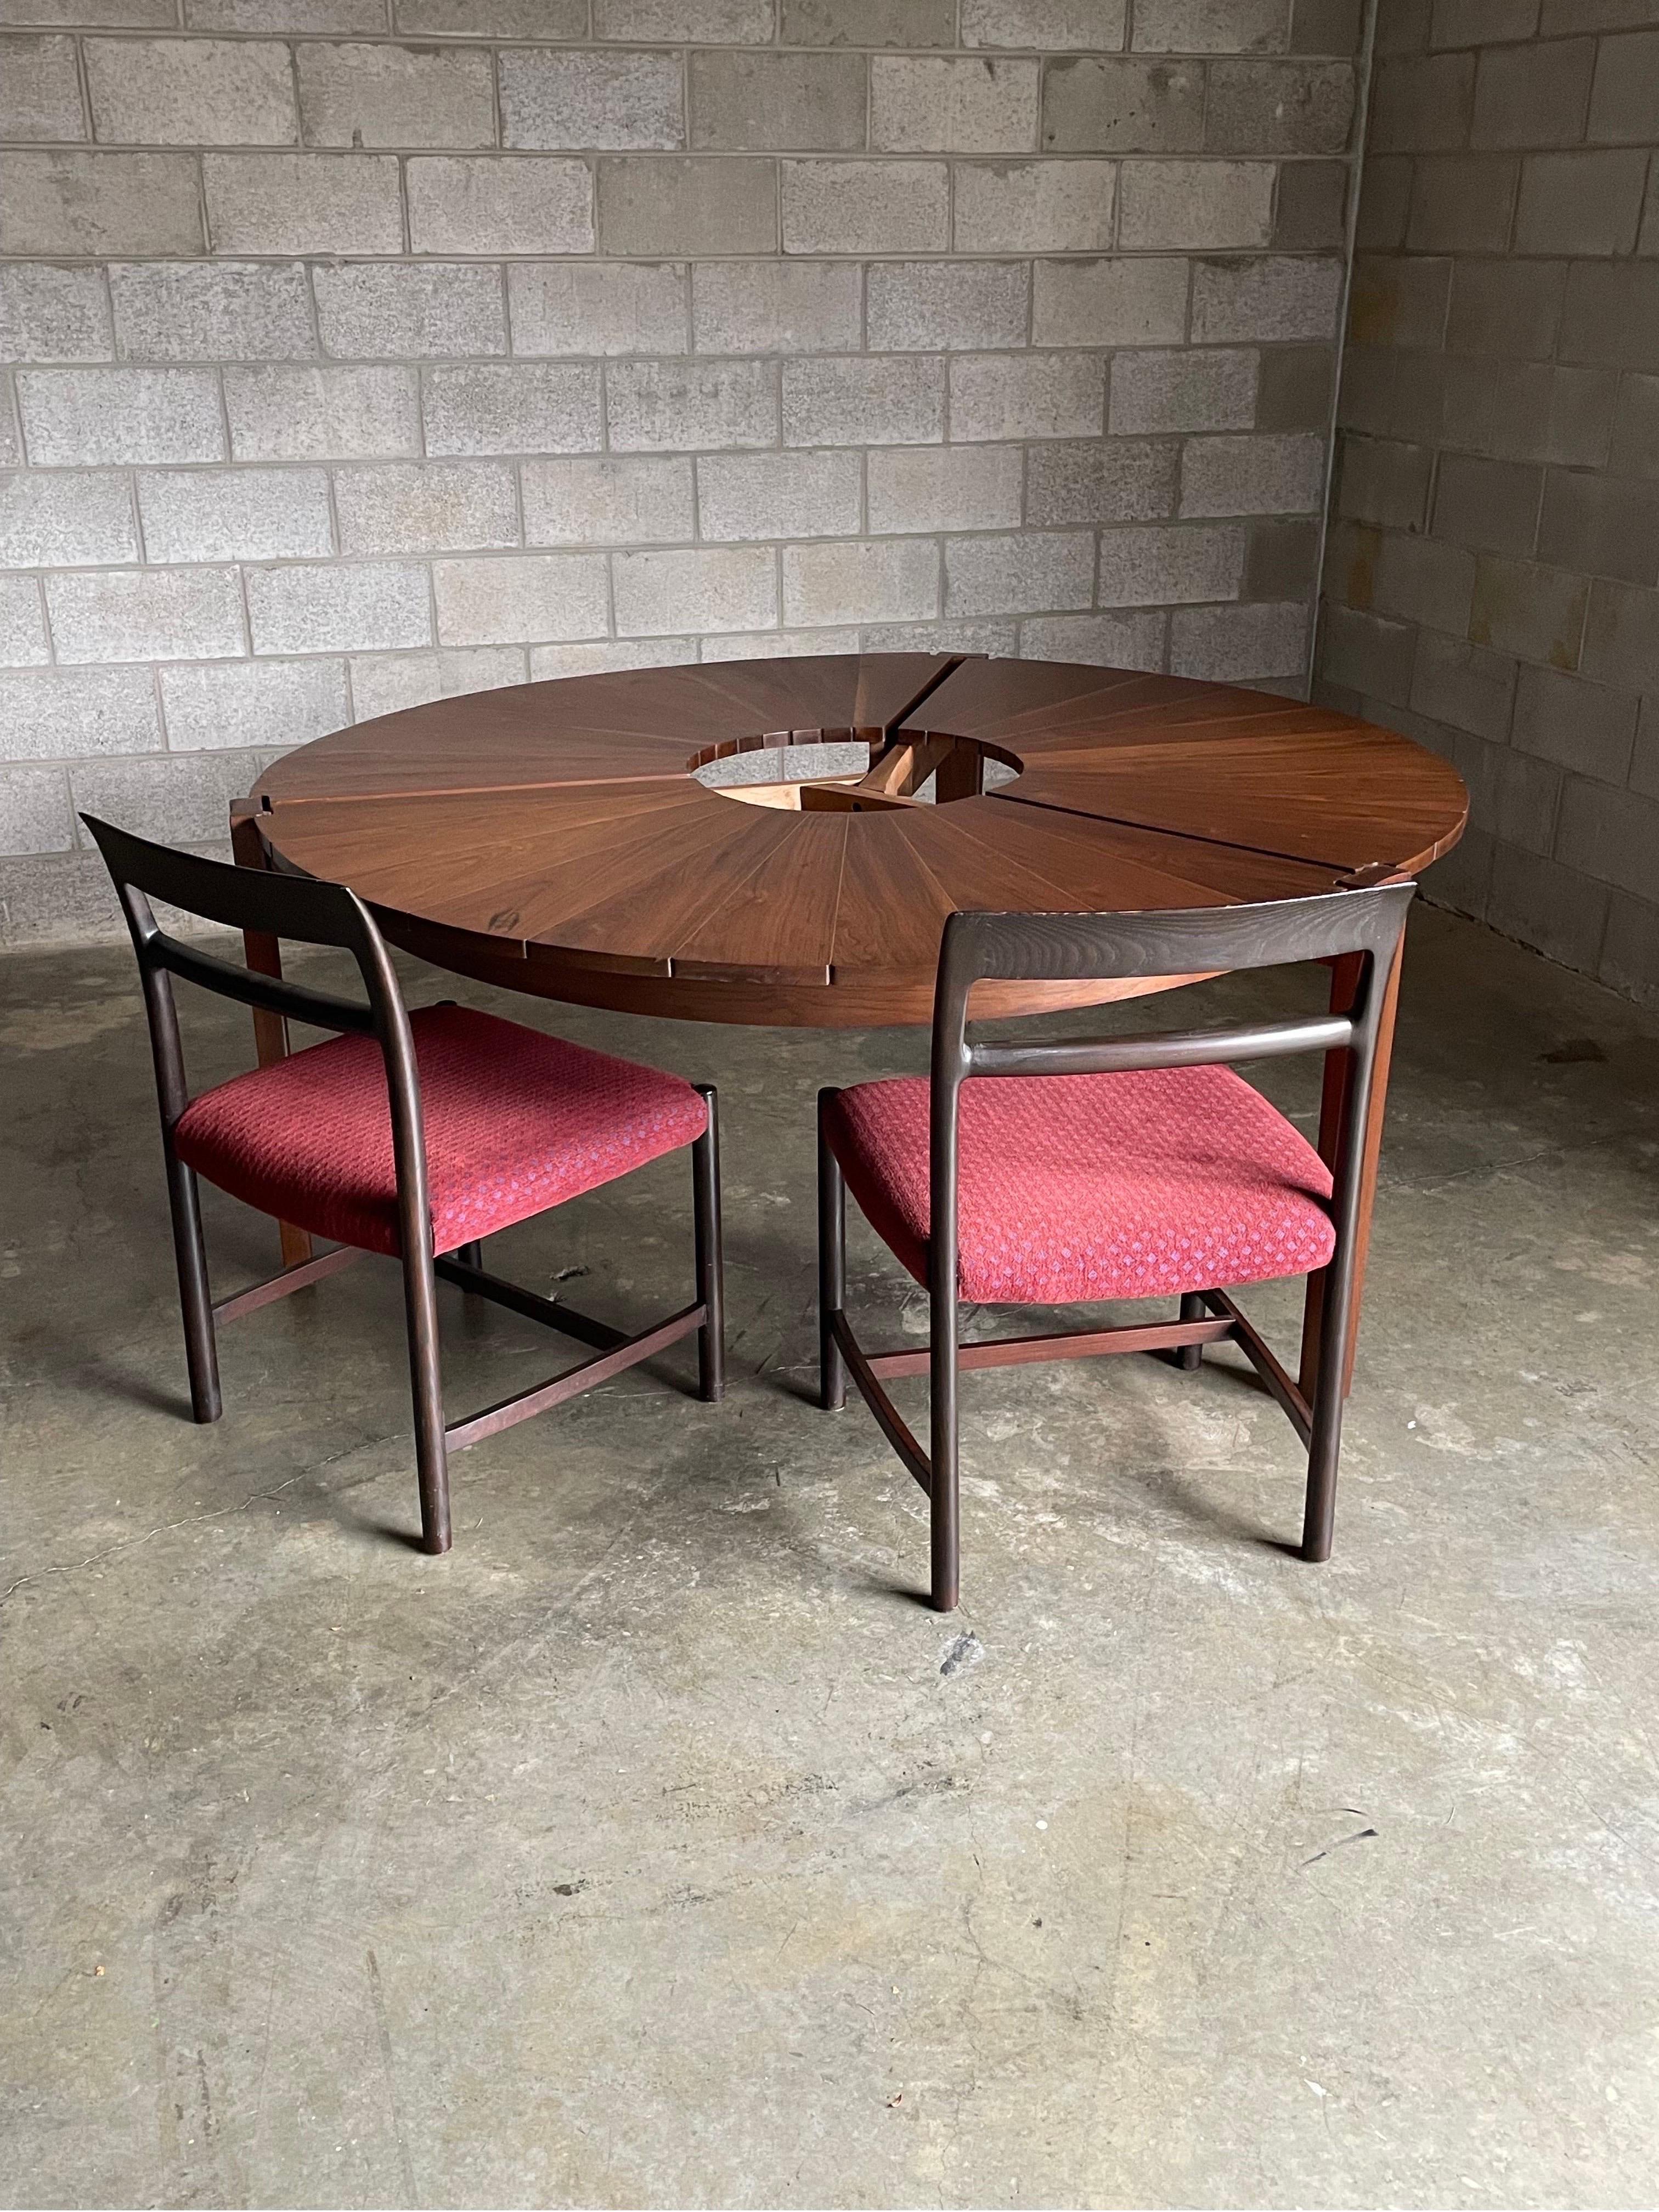 Studiocraft Round Petal Dining Table in Walnut and Maple, Charles Faucher 1975 6